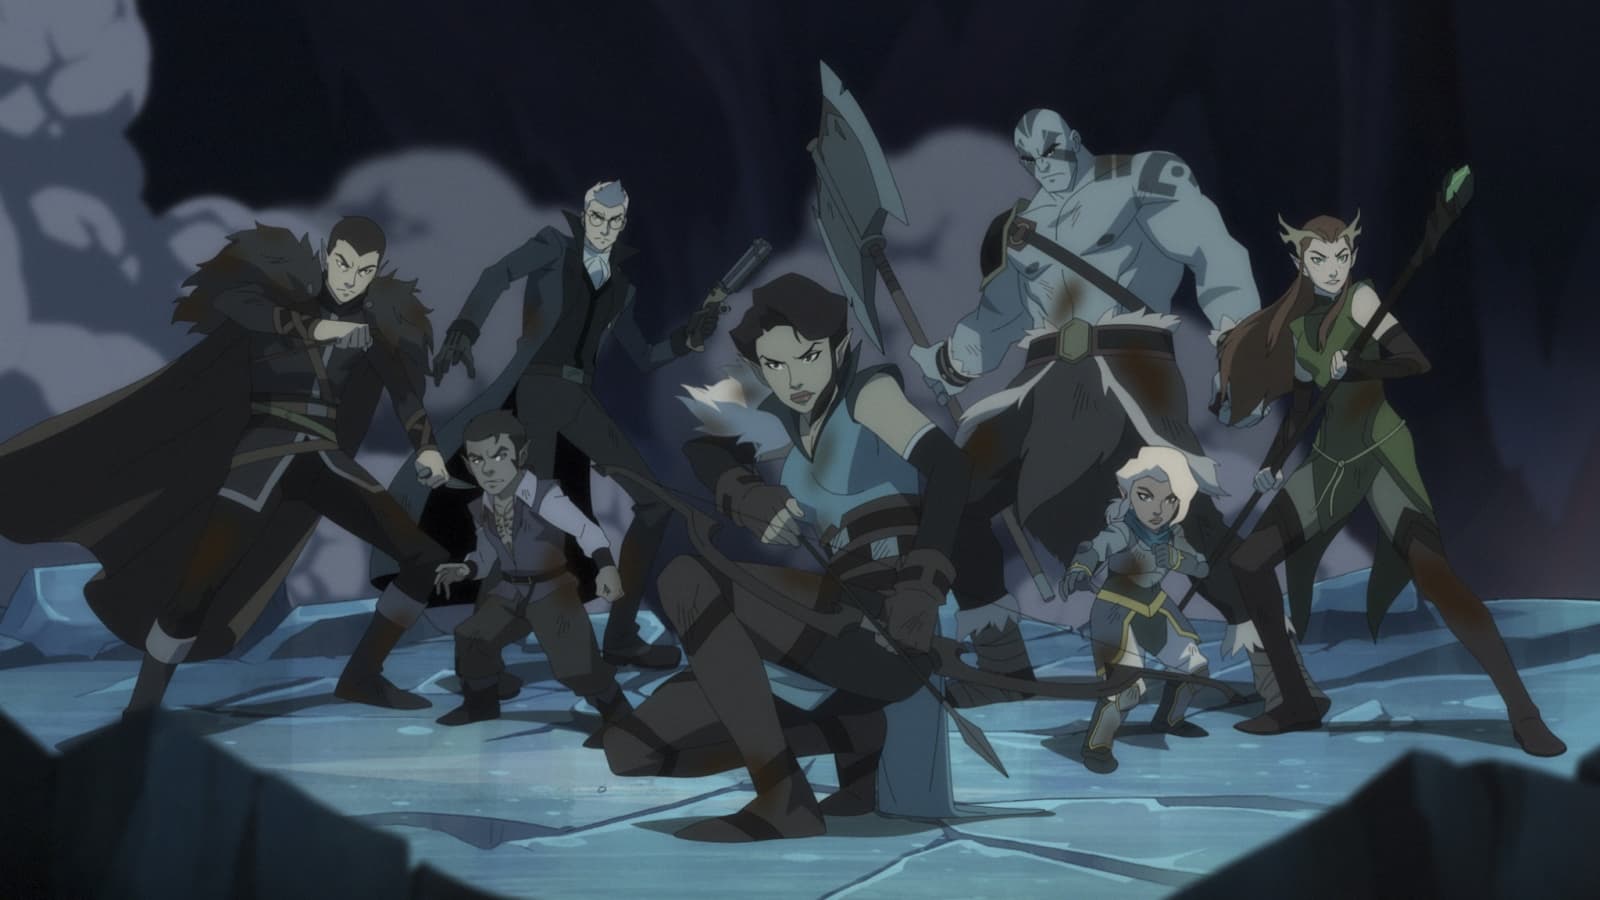 Vox Machina Season 3: Release, Cast, and Everything We Know So Far